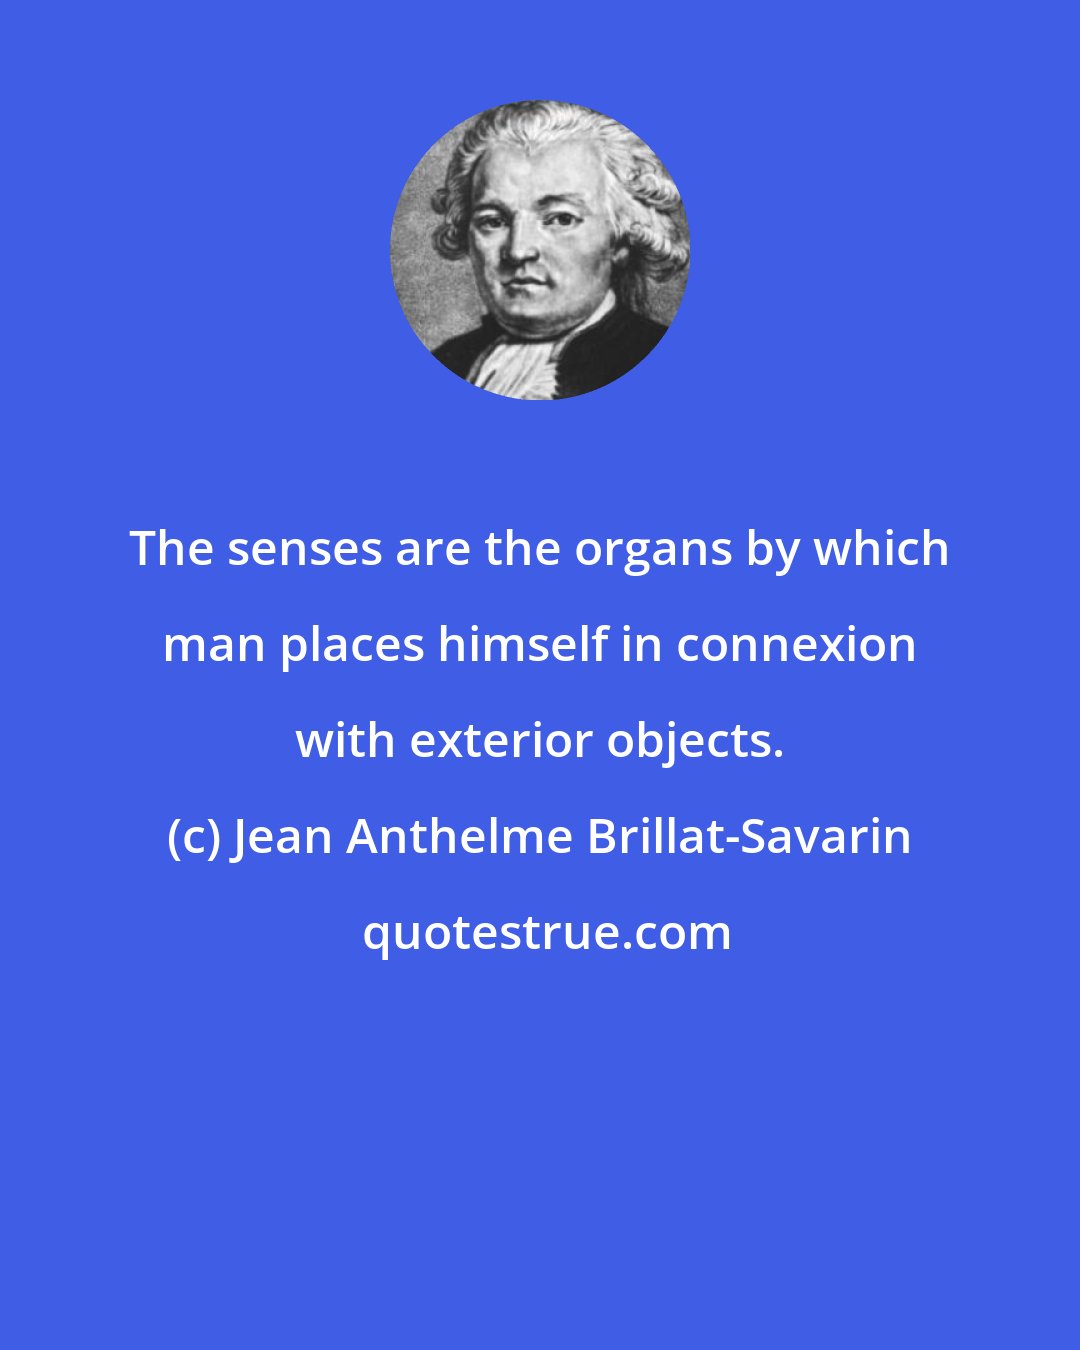 Jean Anthelme Brillat-Savarin: The senses are the organs by which man places himself in connexion with exterior objects.